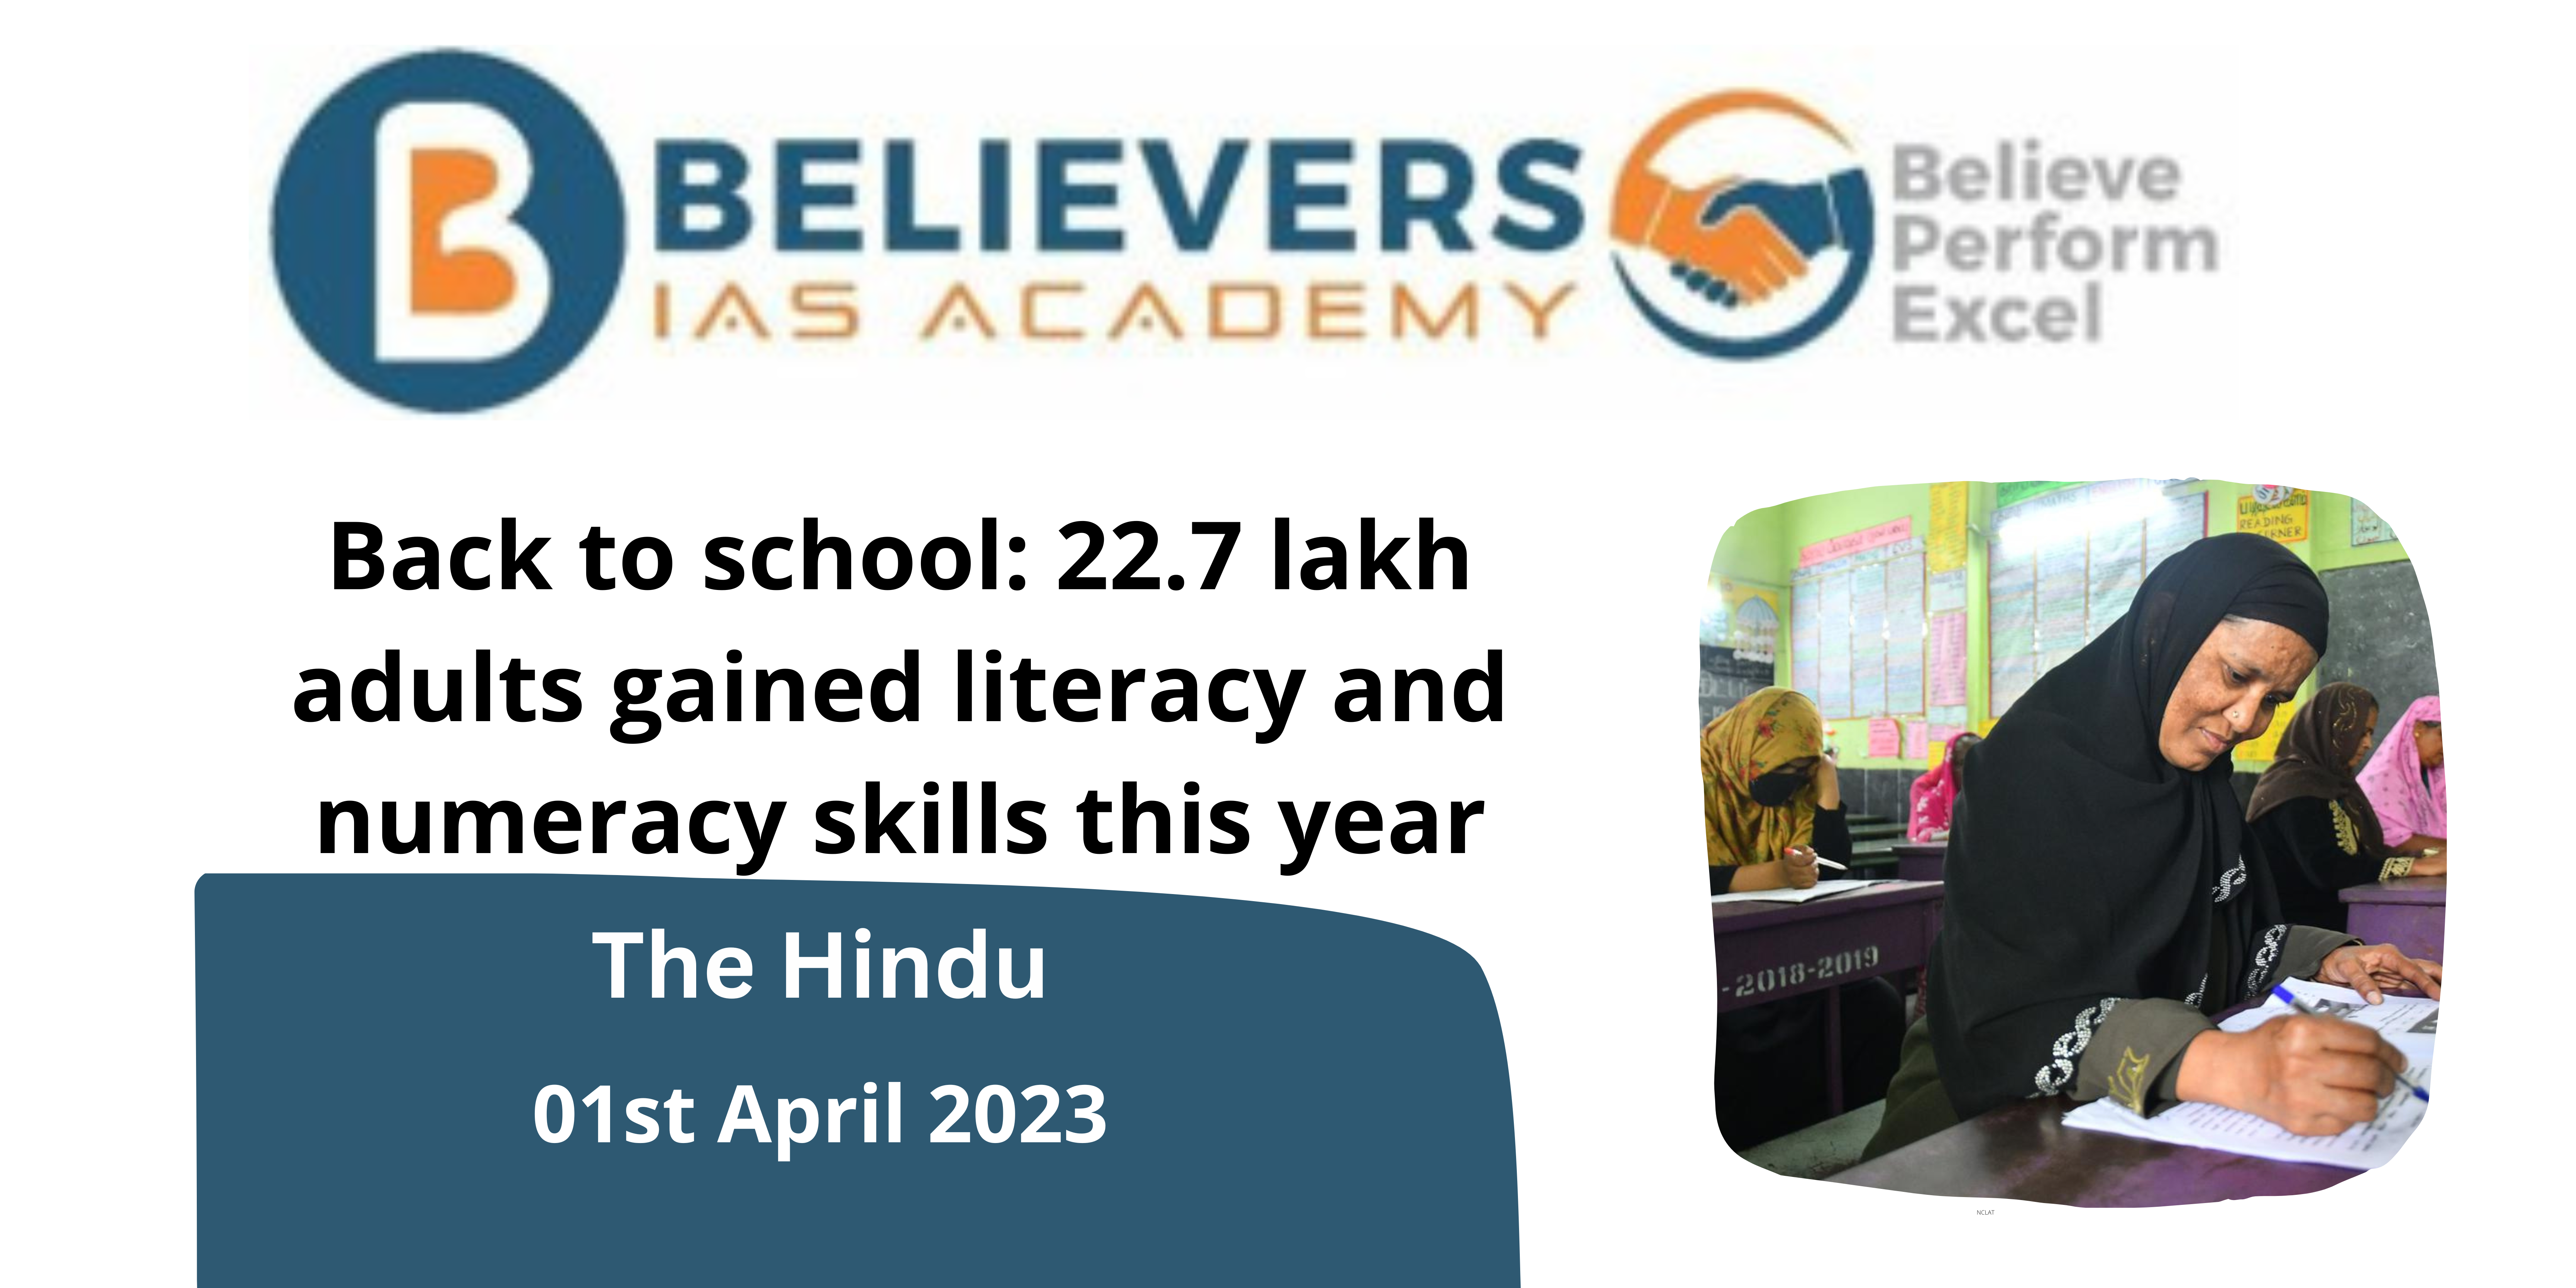 Back to school: 22.7 lakh adults gained literacy and numeracy skills this year